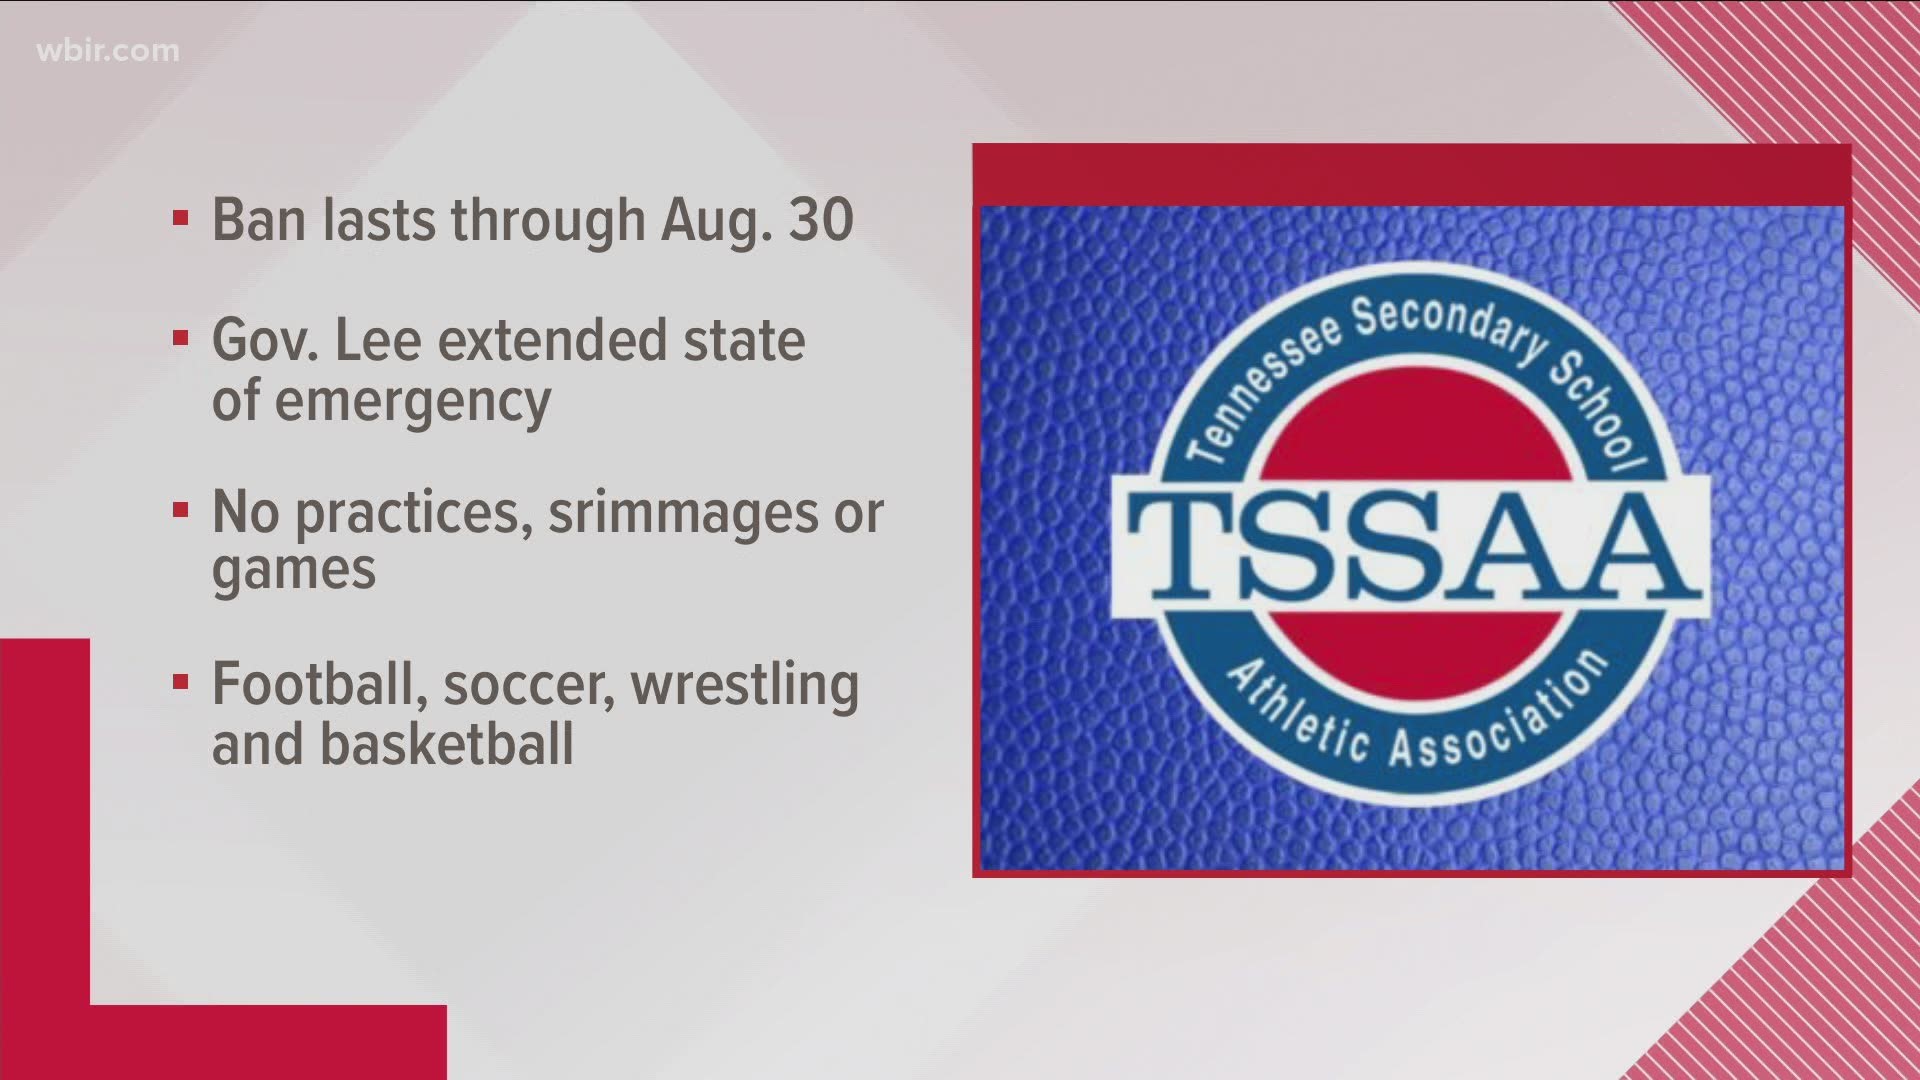 The TSSAA announced schools cannot have any contact sport activities until August 30th.